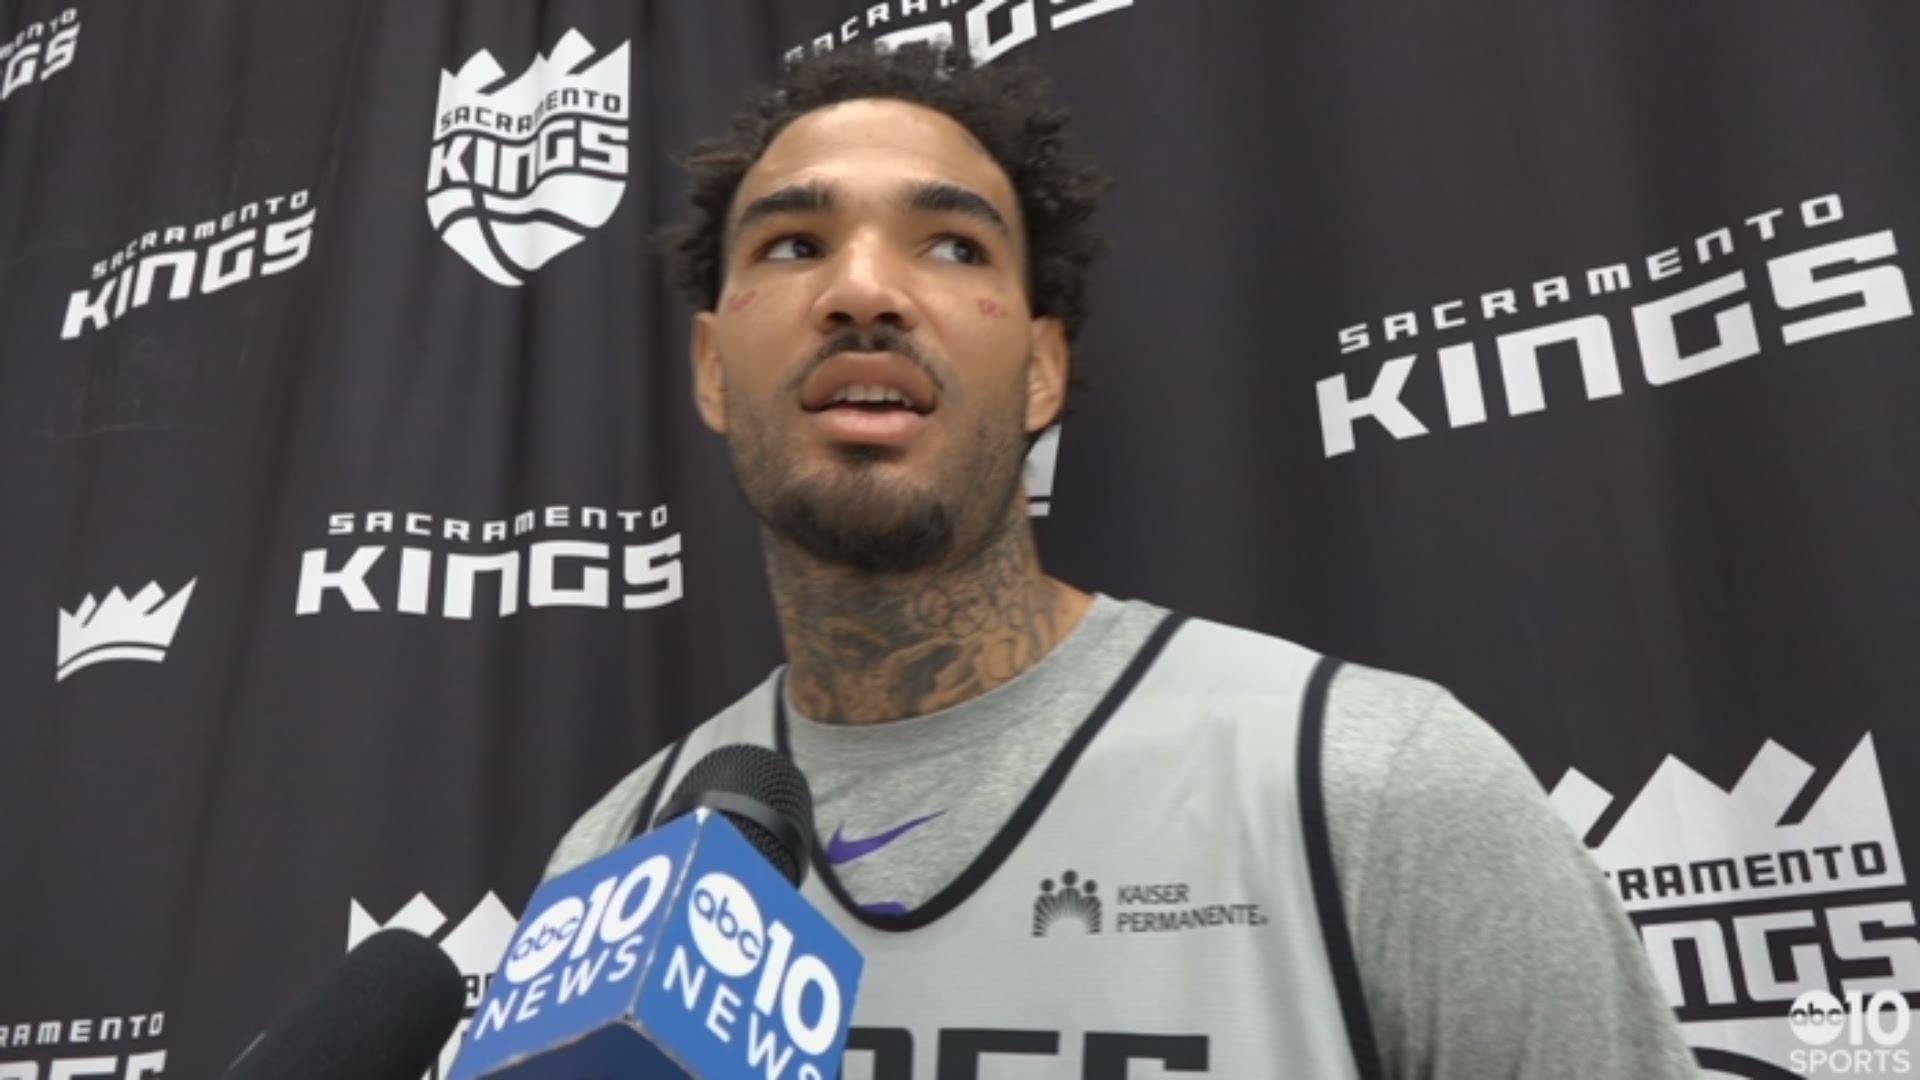 A day after their win over the Oklahoma City Thunder, Kings center Willie Cauley-Stein discusses his brief altercation with Russell Westbrook in the contest, teams trying to muck up the game, Iman Shumpert's toughness and facing the Jazz in Utah on Wednes